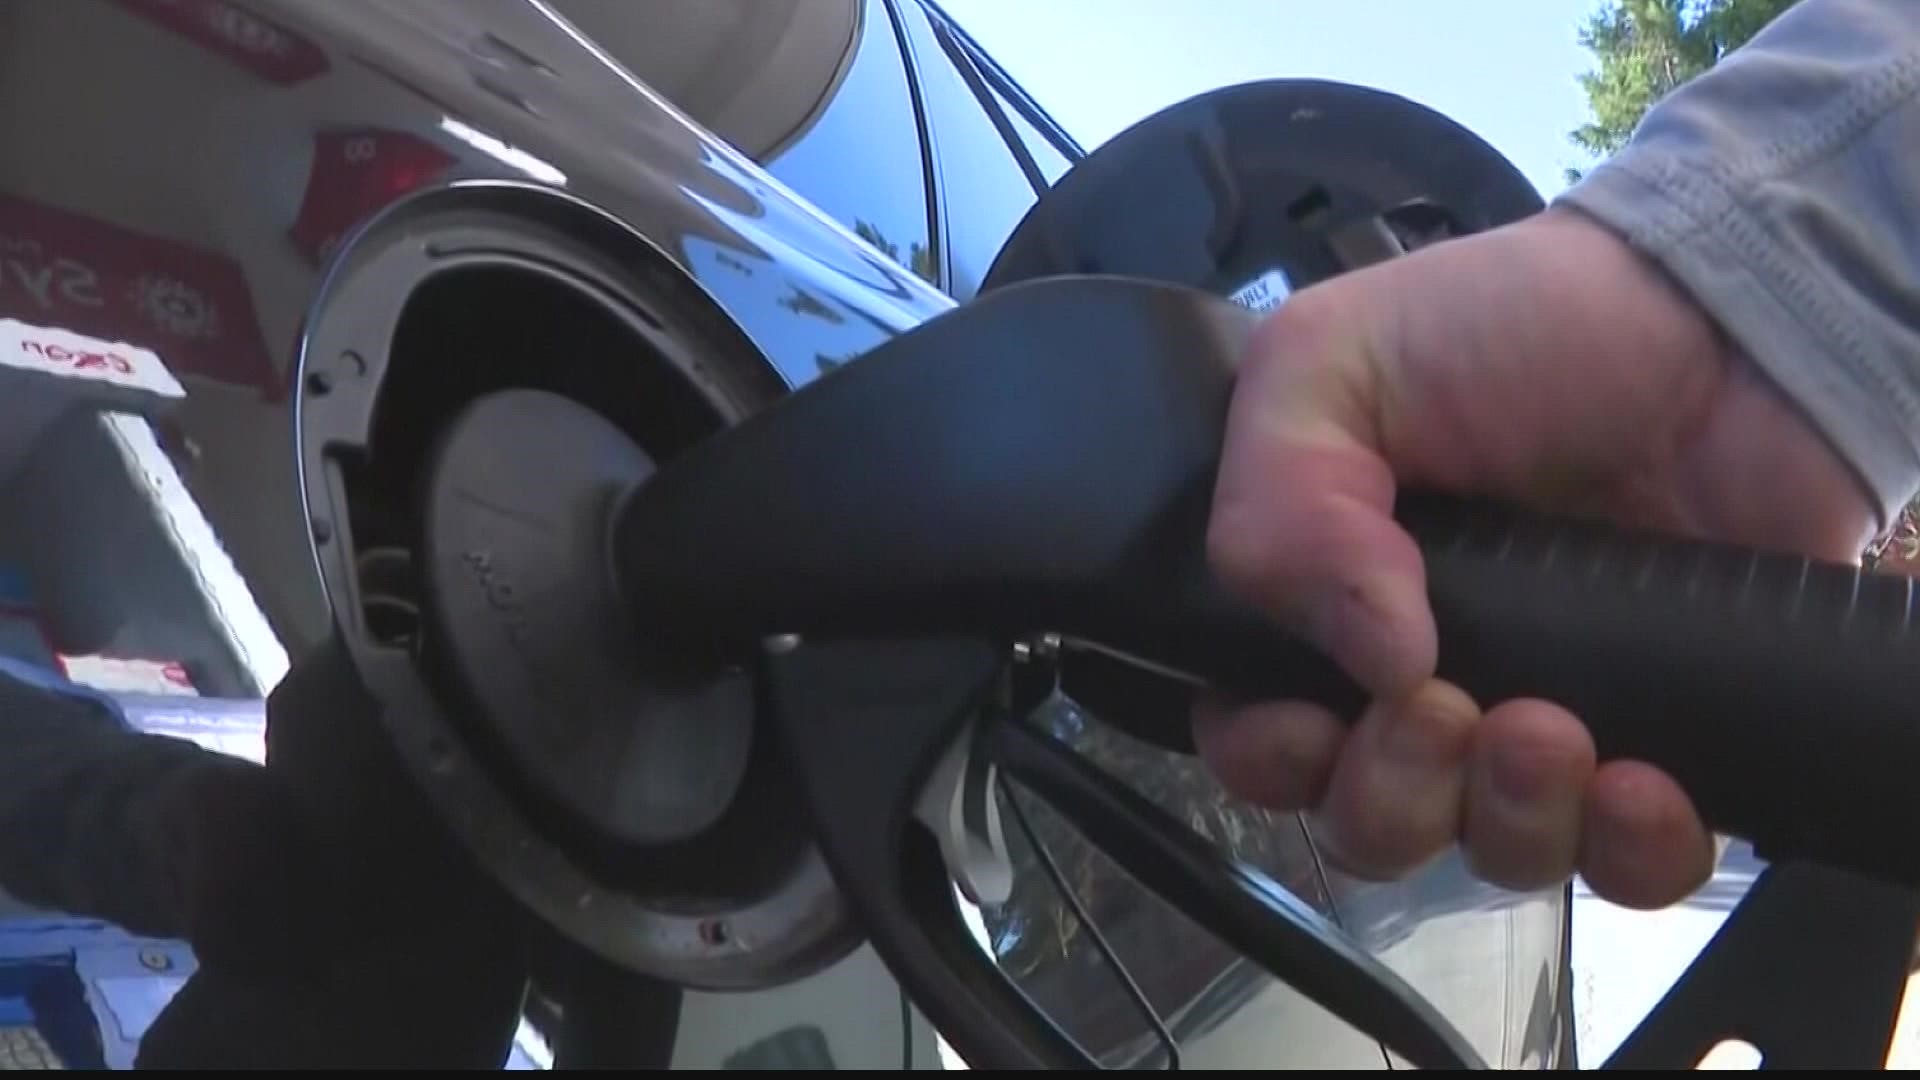 Gas prices took another jump in Georgia and experts say they're likely to continue climbing into the summer.